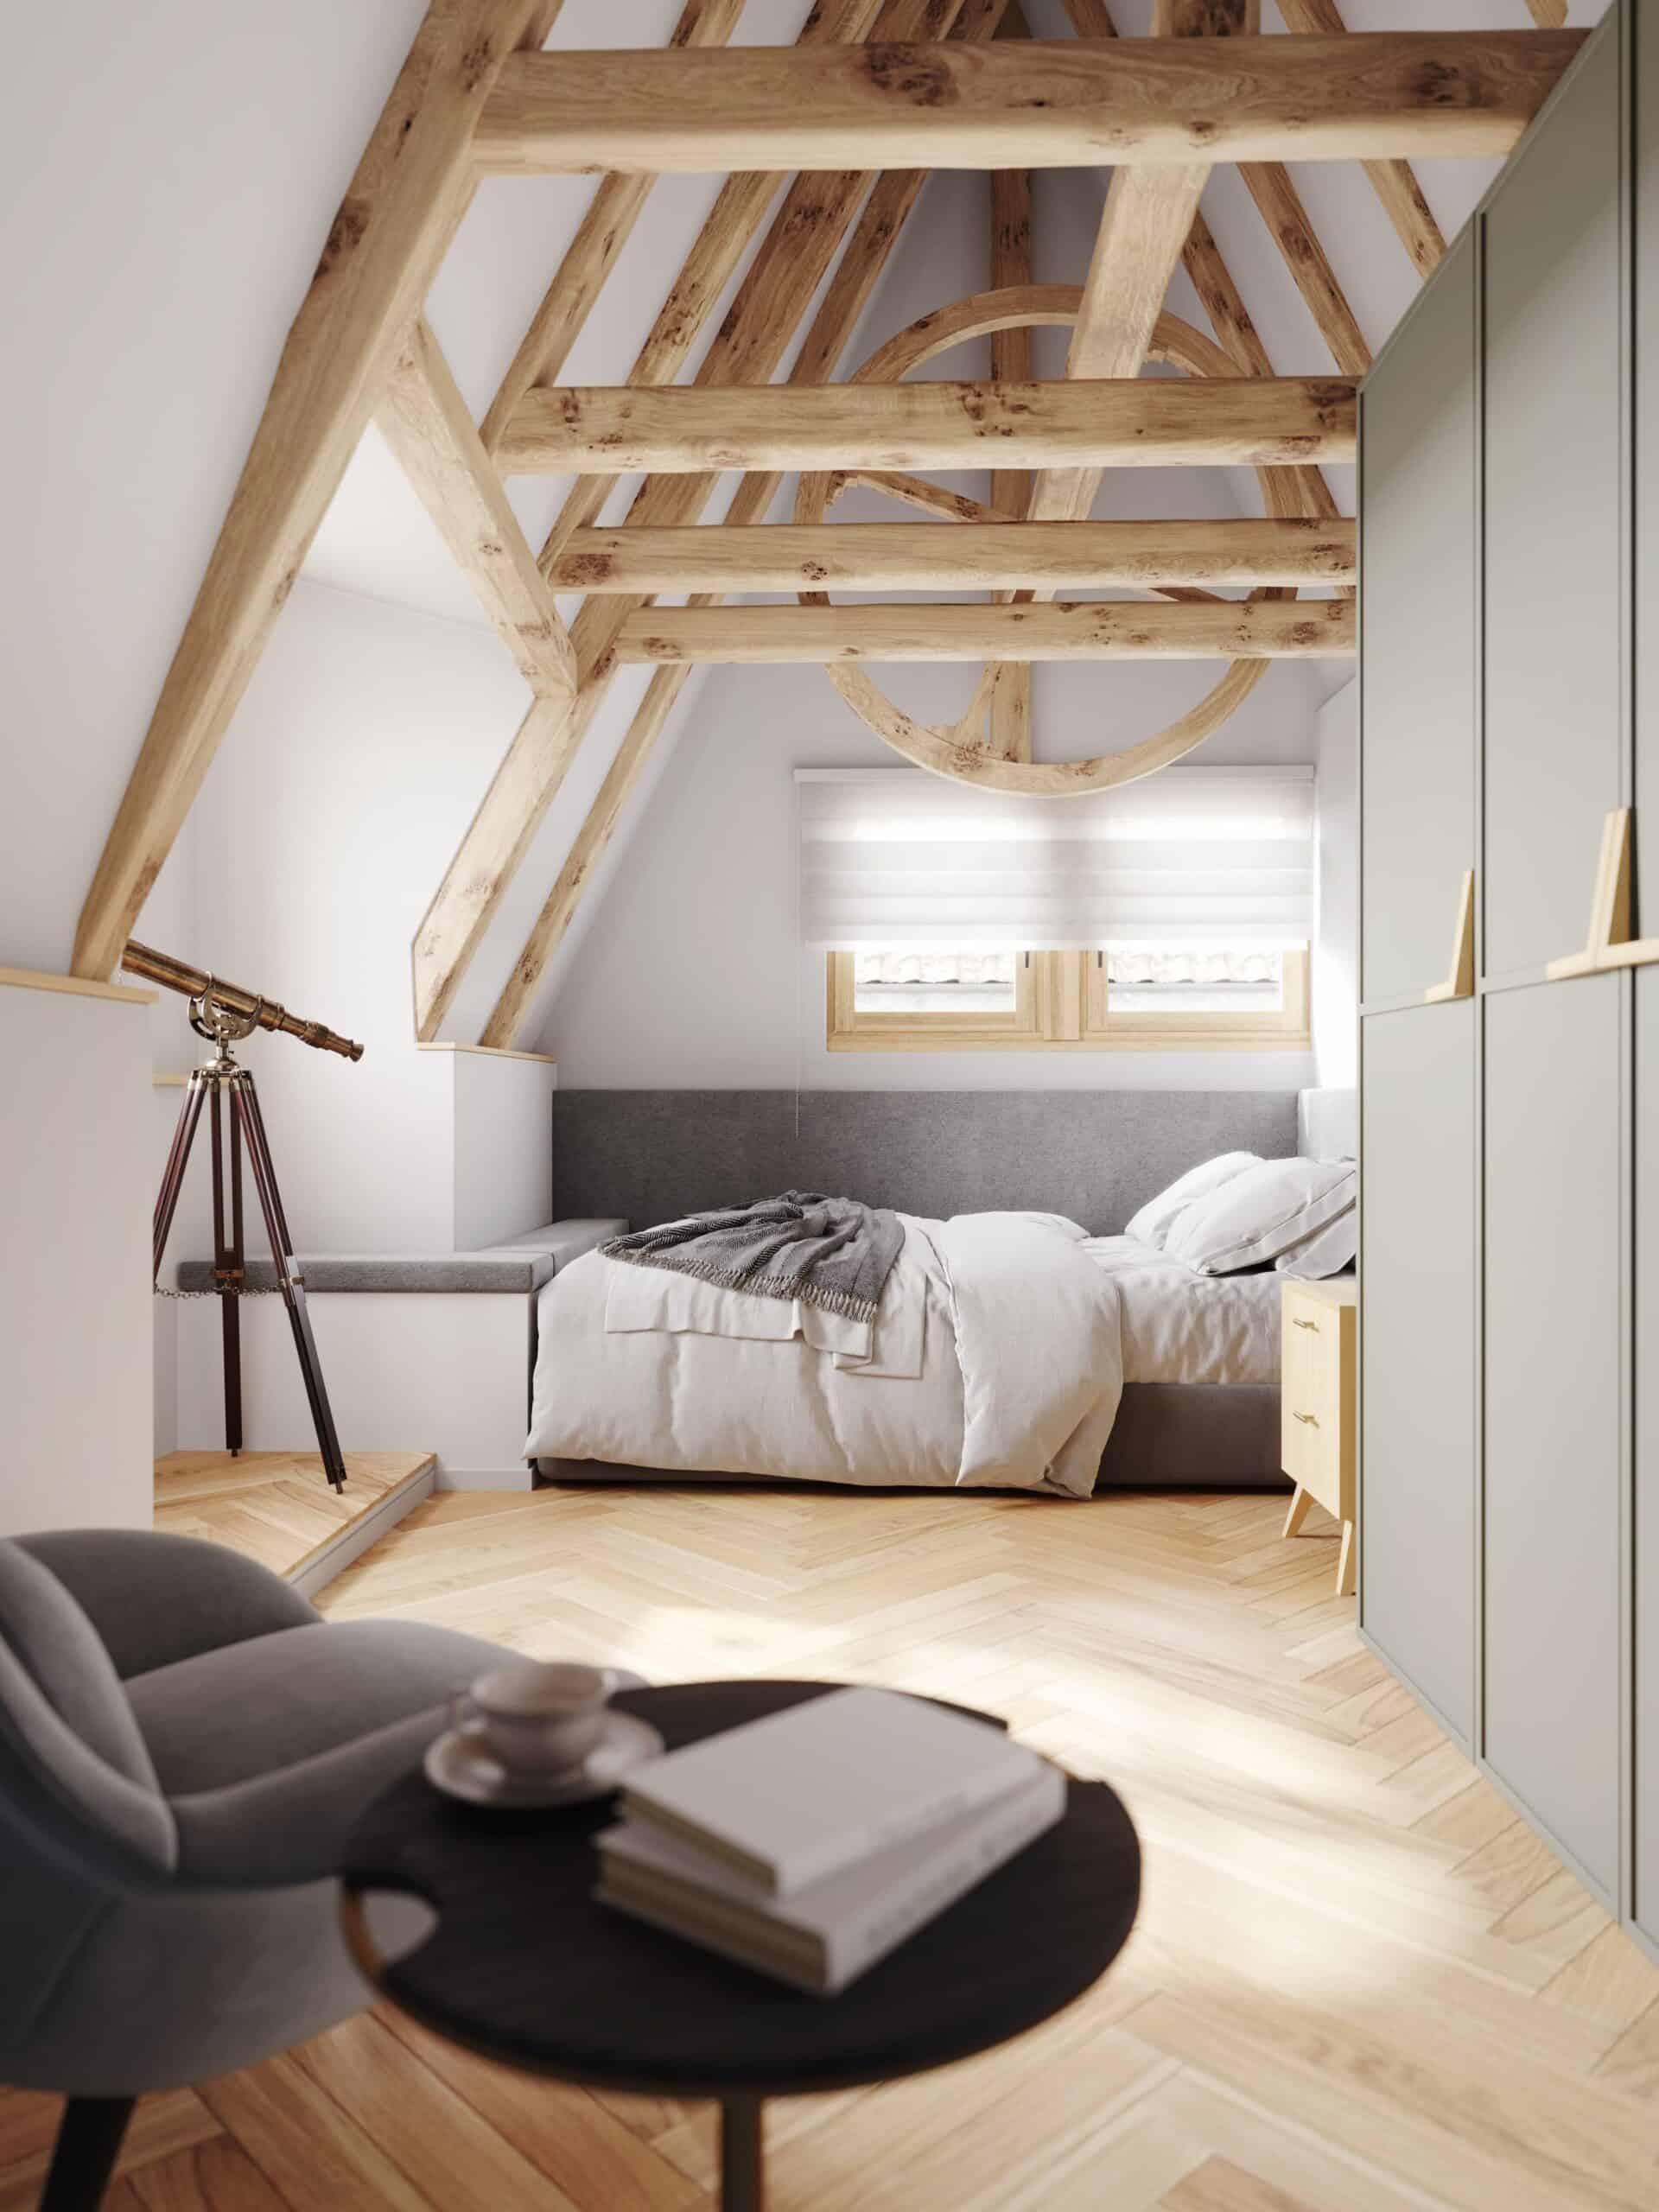 How to layout your bedroom: Top 10 tips